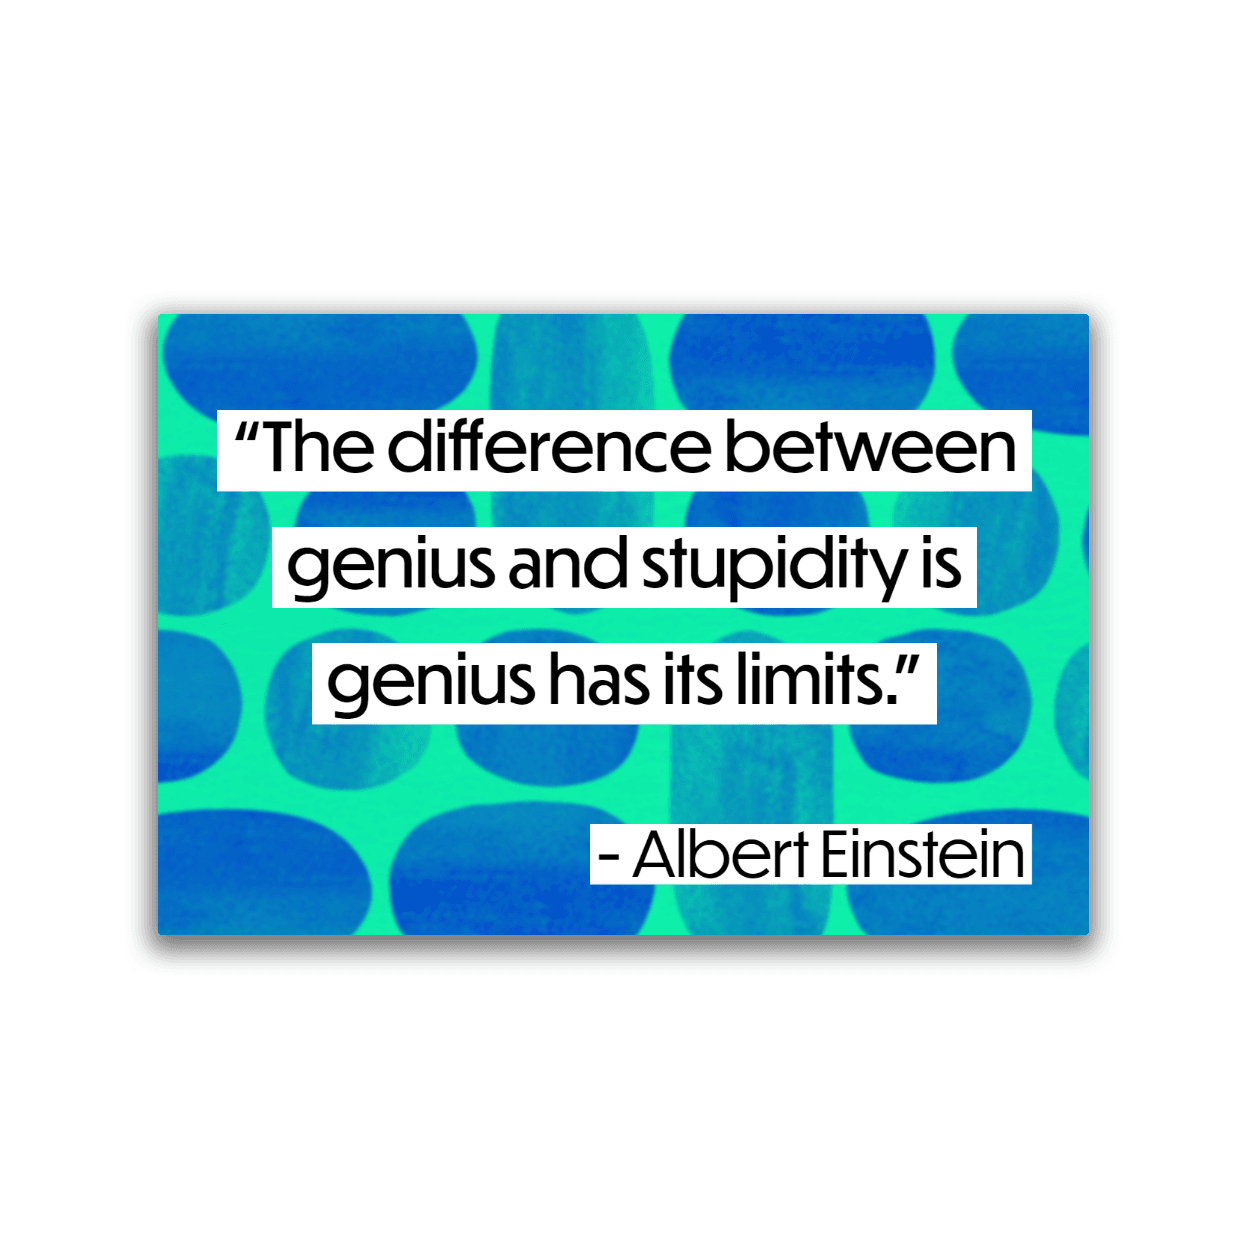 Image of a 2x3 magnet with a Albert Einstein quote